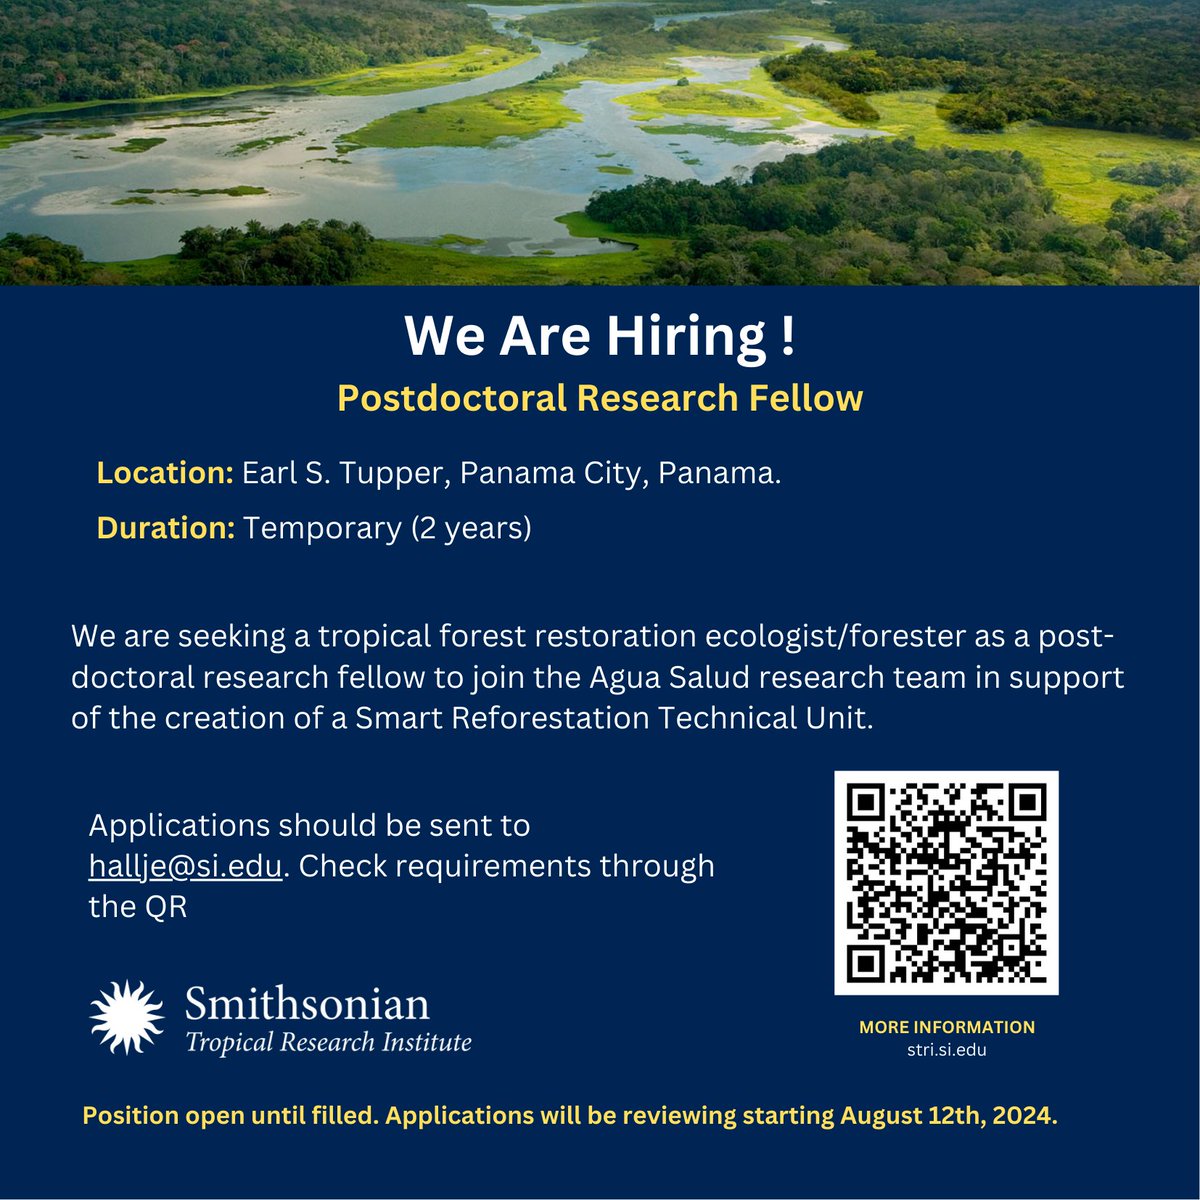 A unique (and highly recommended) post-doc opportunity in Panamá with STRI for someone working in restoration ecology or applied ecology, that features an intriguing balance between research and outreach with indigenous communities. Please share widely! @stri_panama